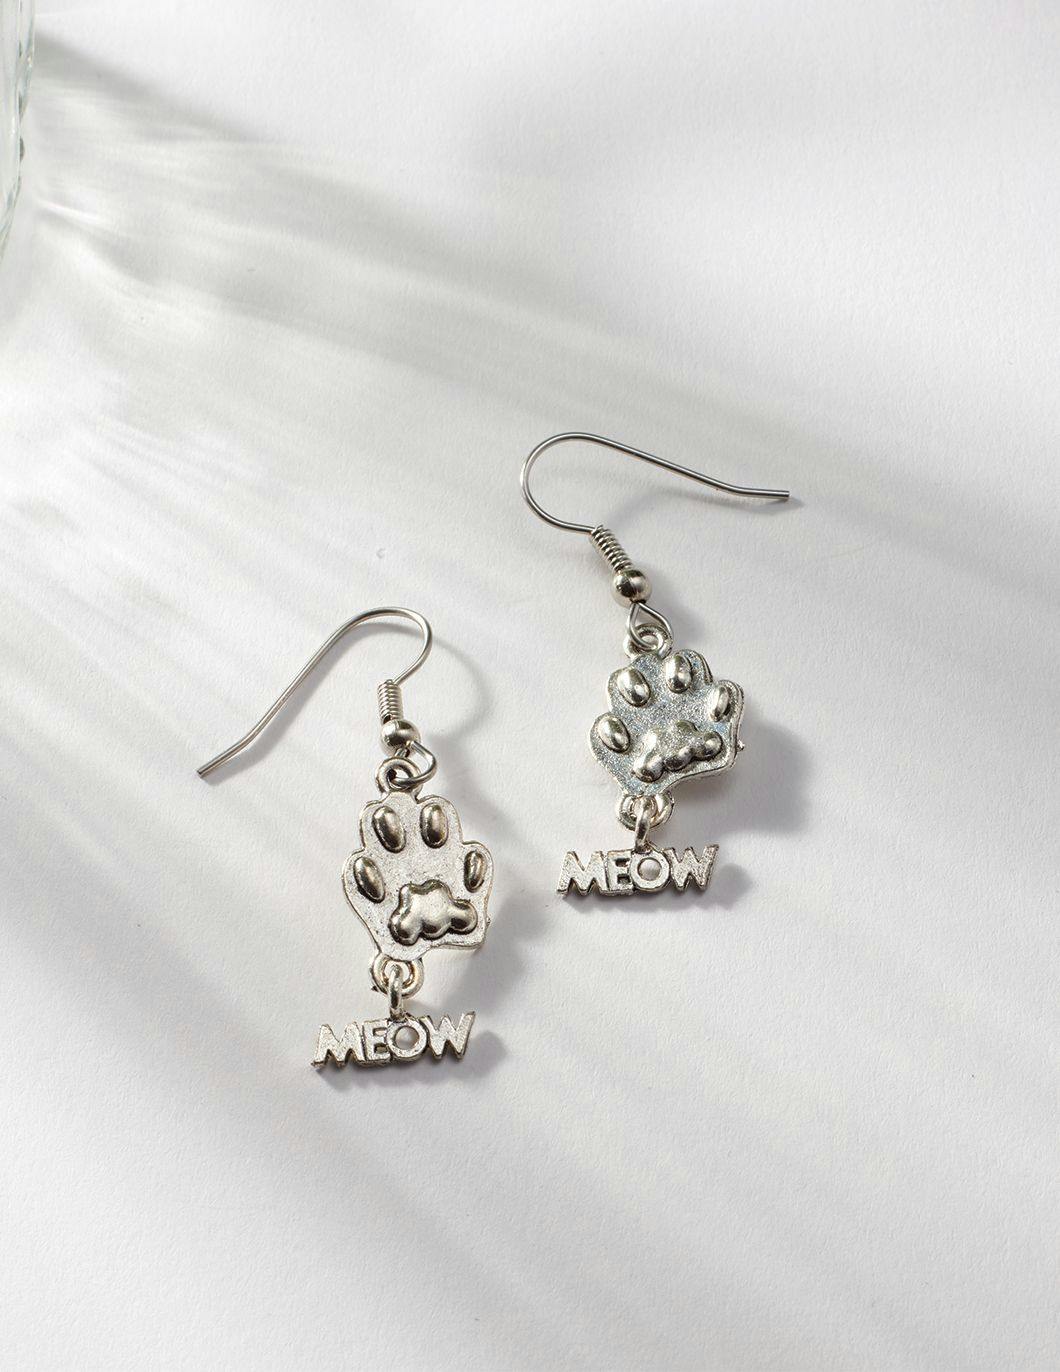 pewter-stainless-steel-earrings-meow-meow-paws